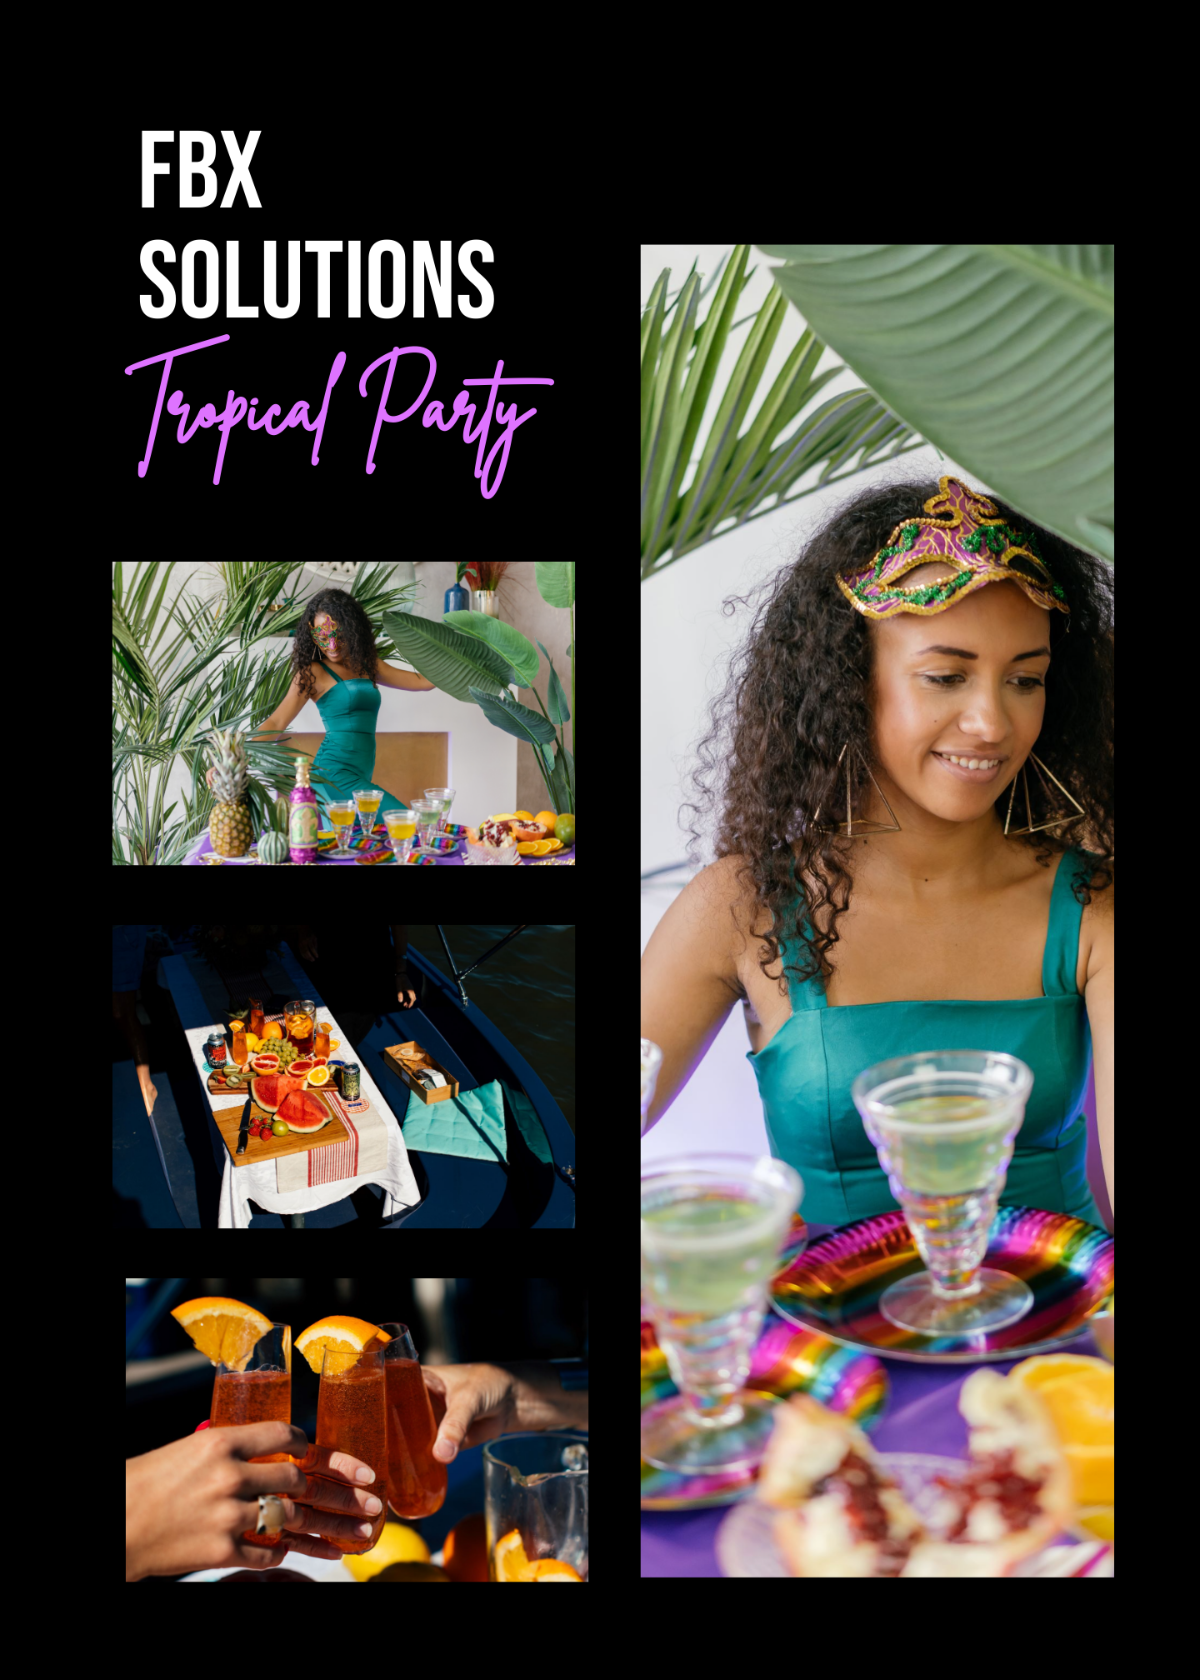 Free Tropical Photo Booth Template